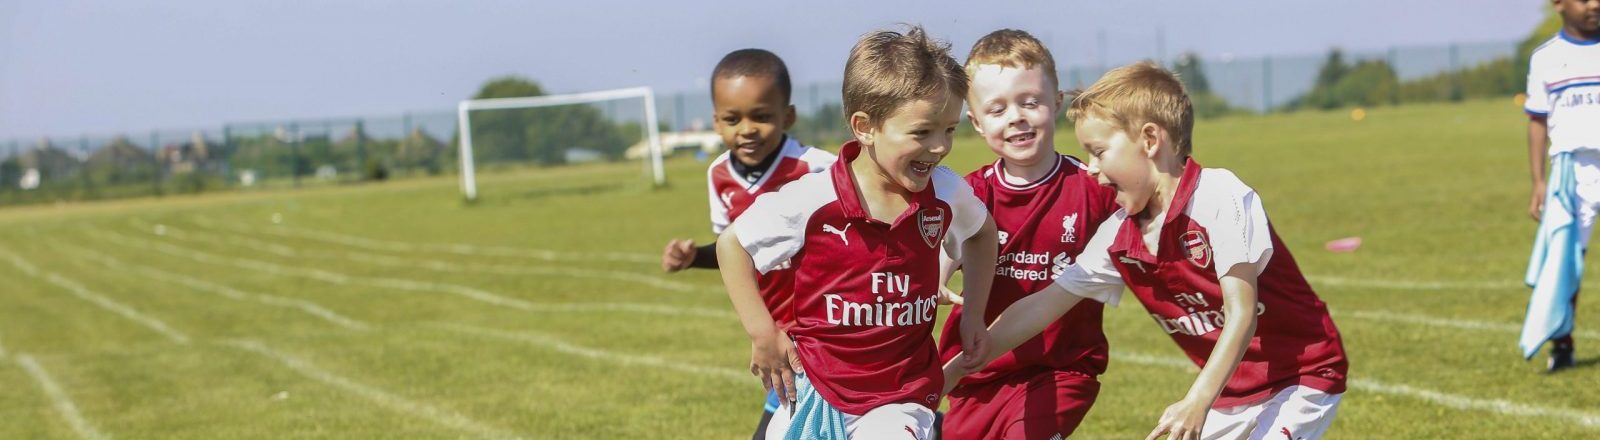 School Holiday Football Coaching & Camps London